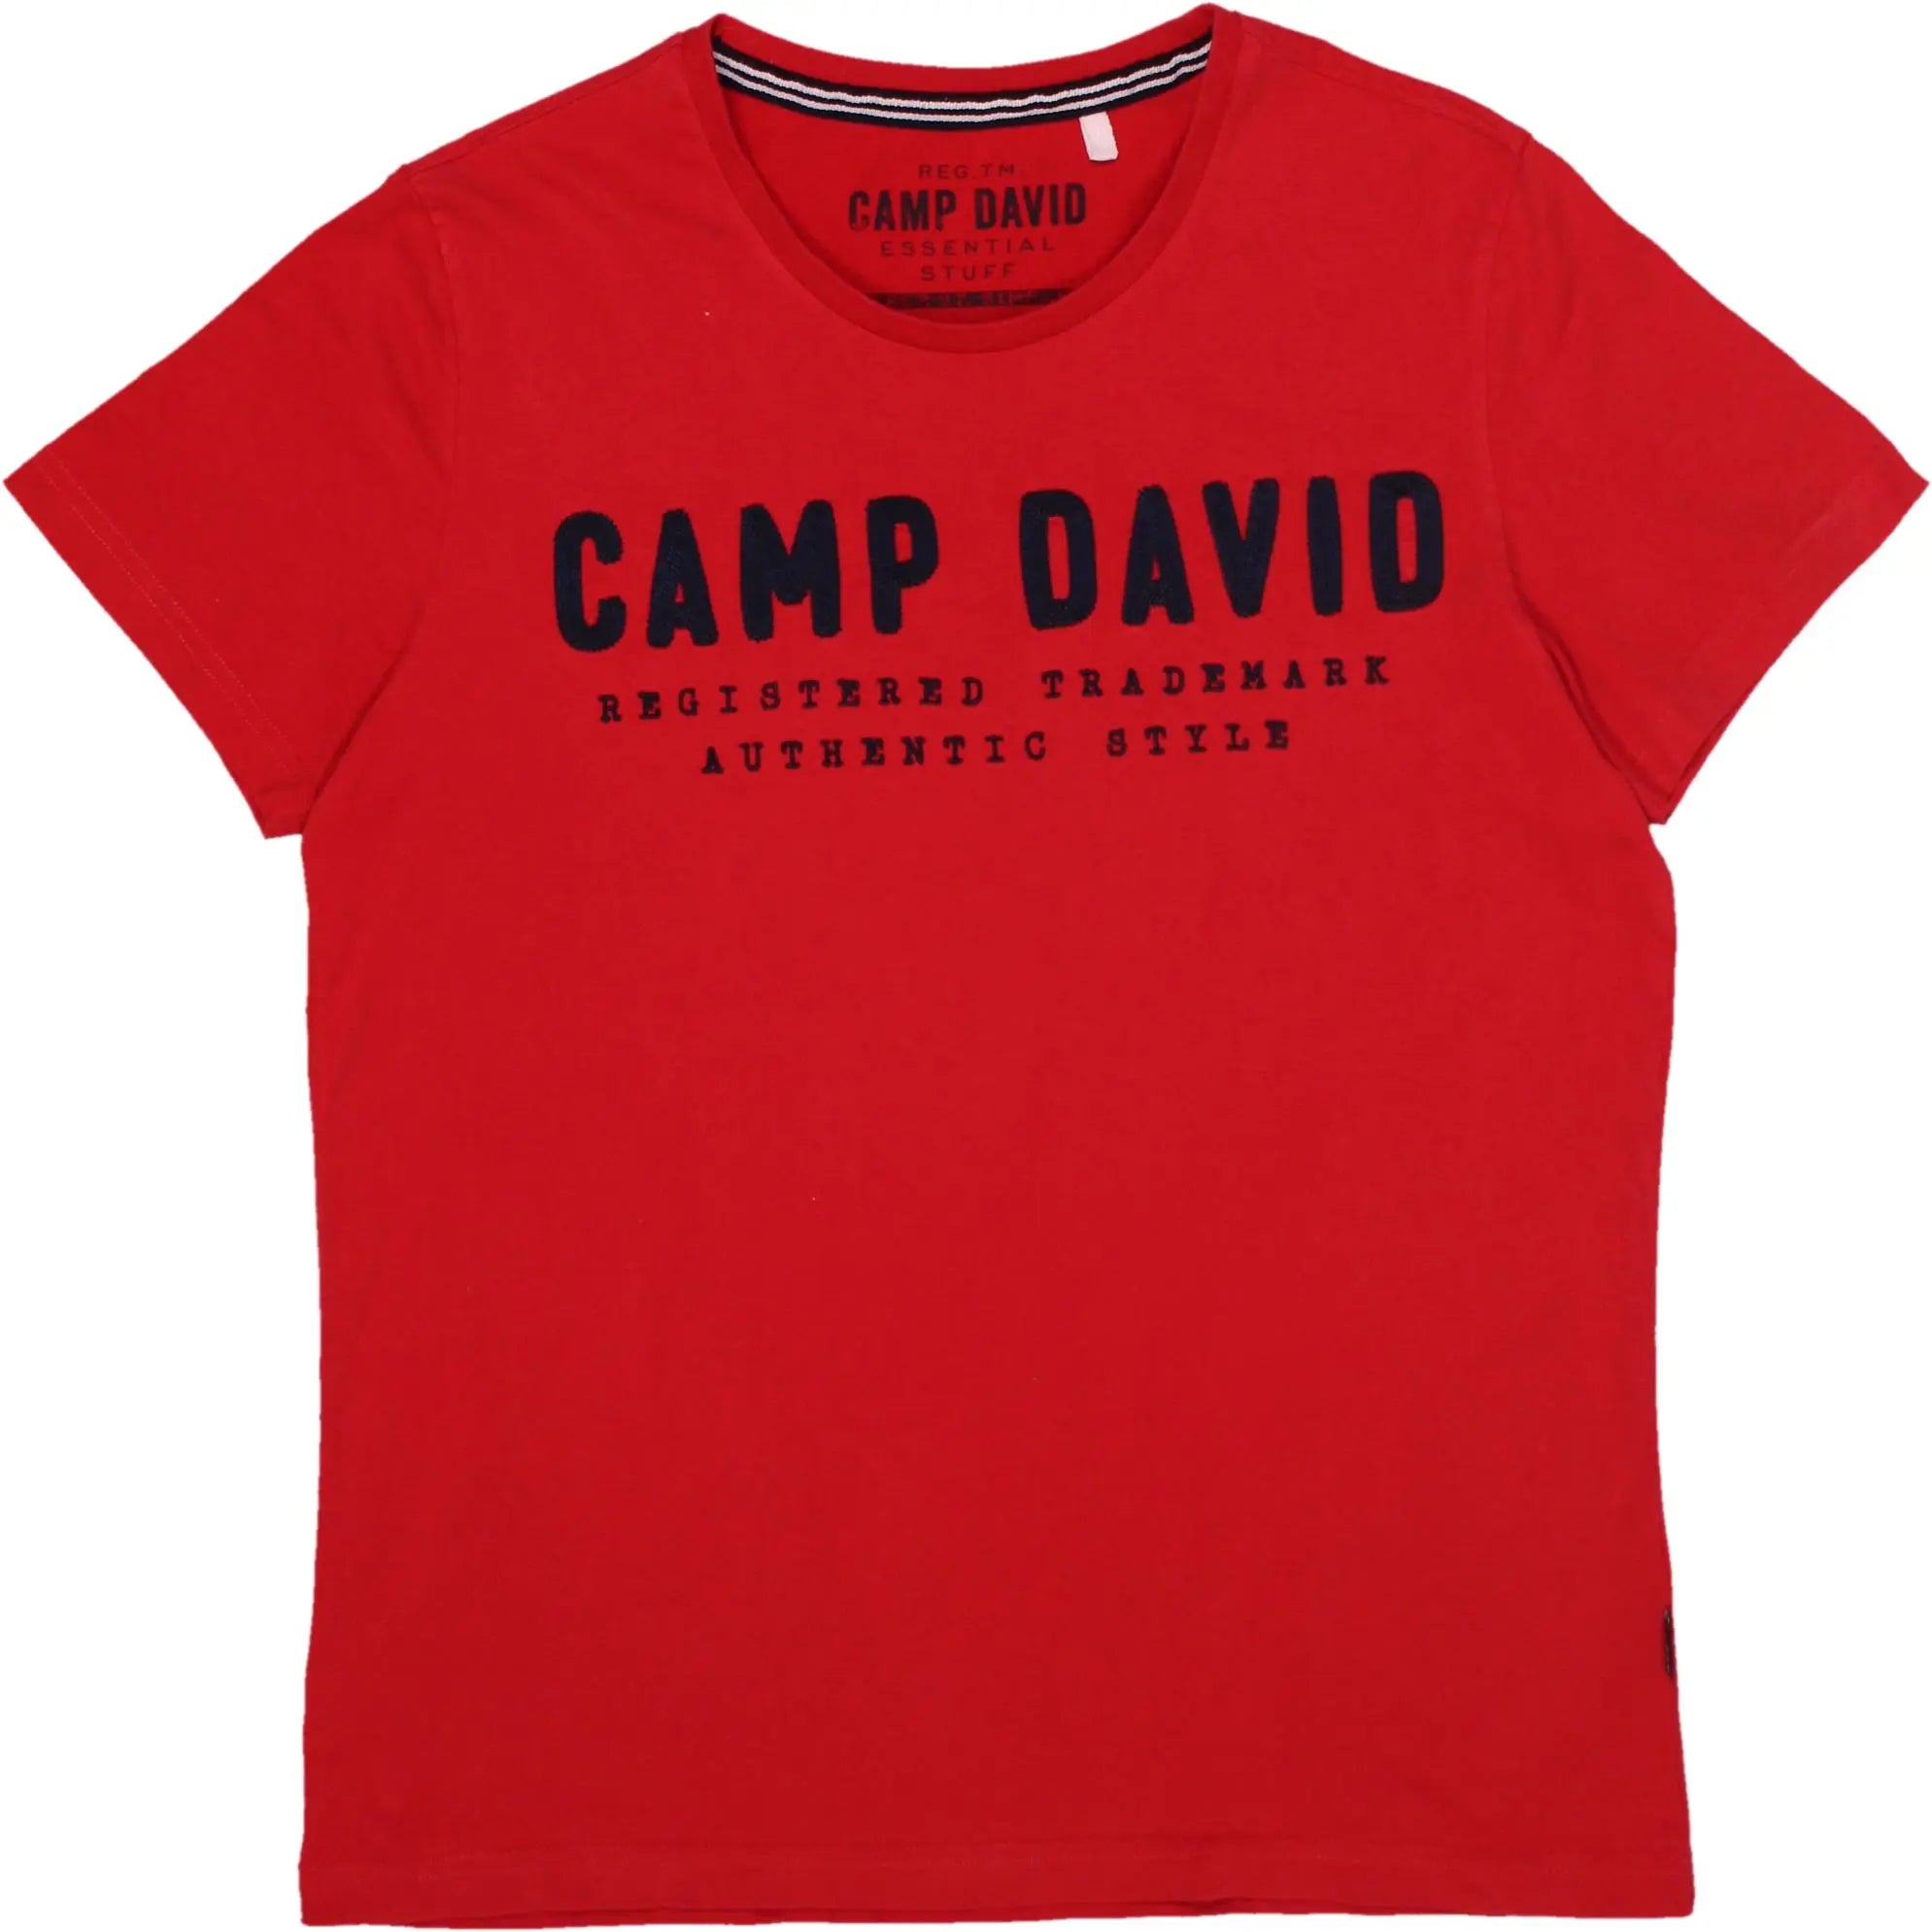 Camp David - Red T-shirt by Camp David- ThriftTale.com - Vintage and second handclothing